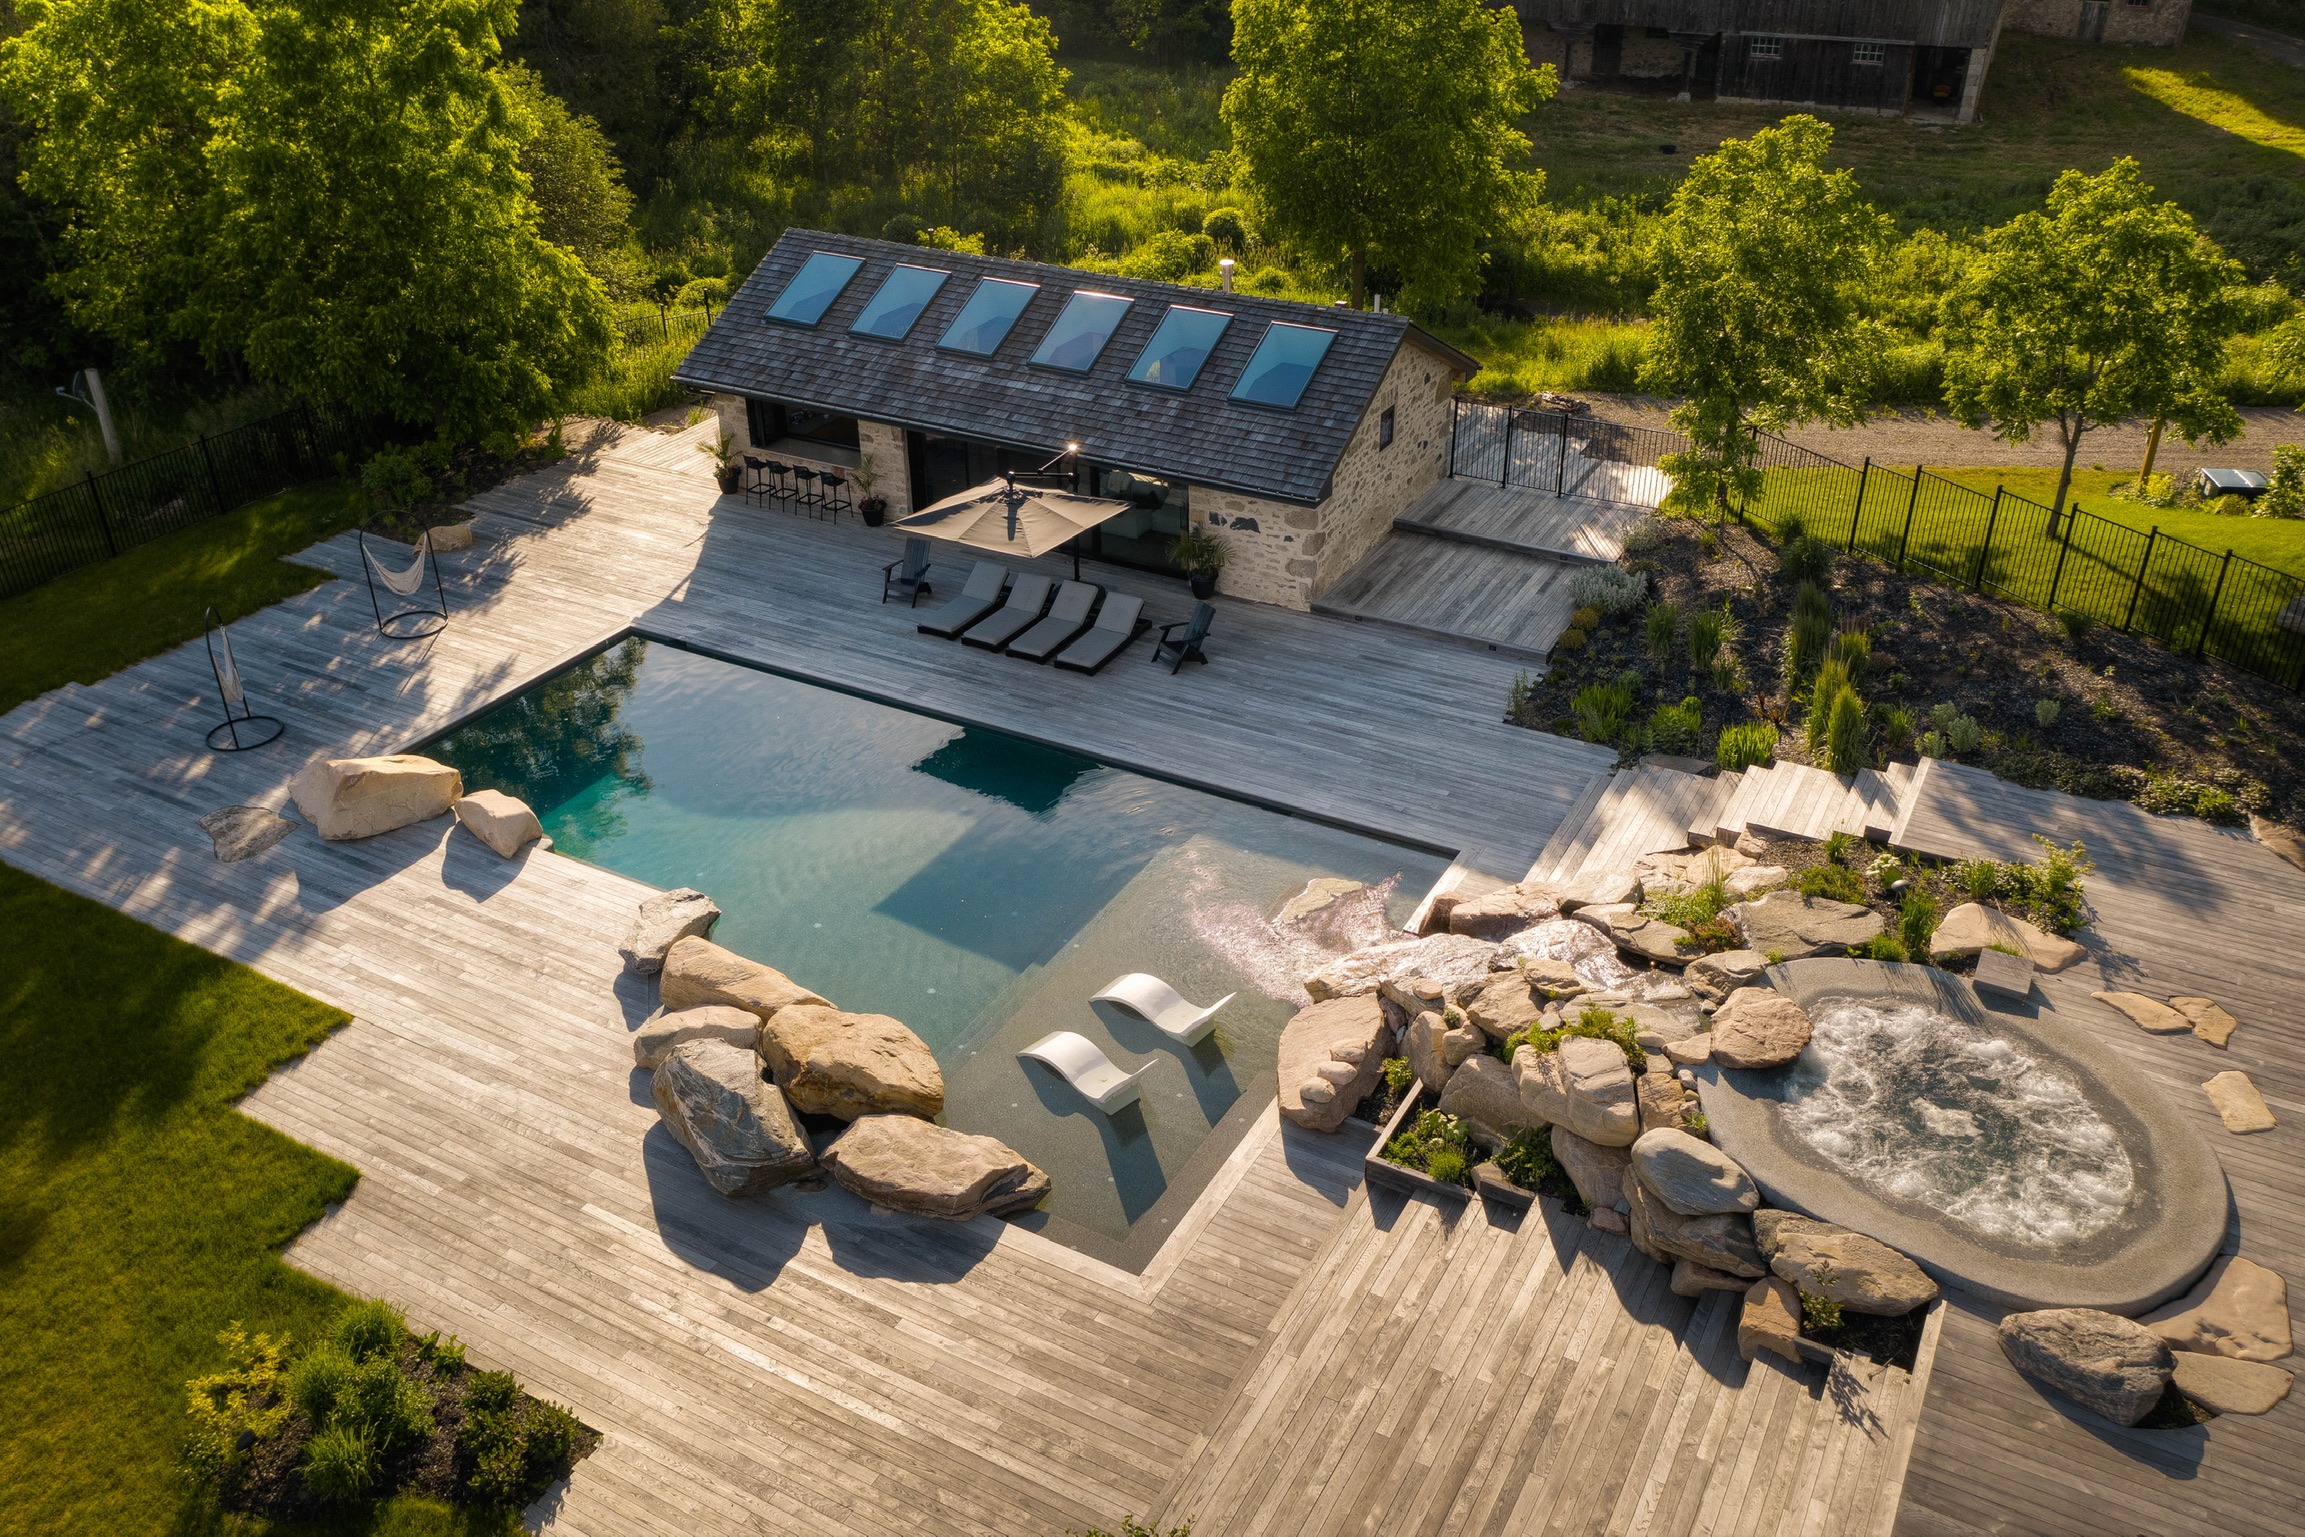 A modern backyard with a rectangular pool, hot tub, lounging chairs, wooden deck, and a stone house surrounded by lush greenery and fencing.